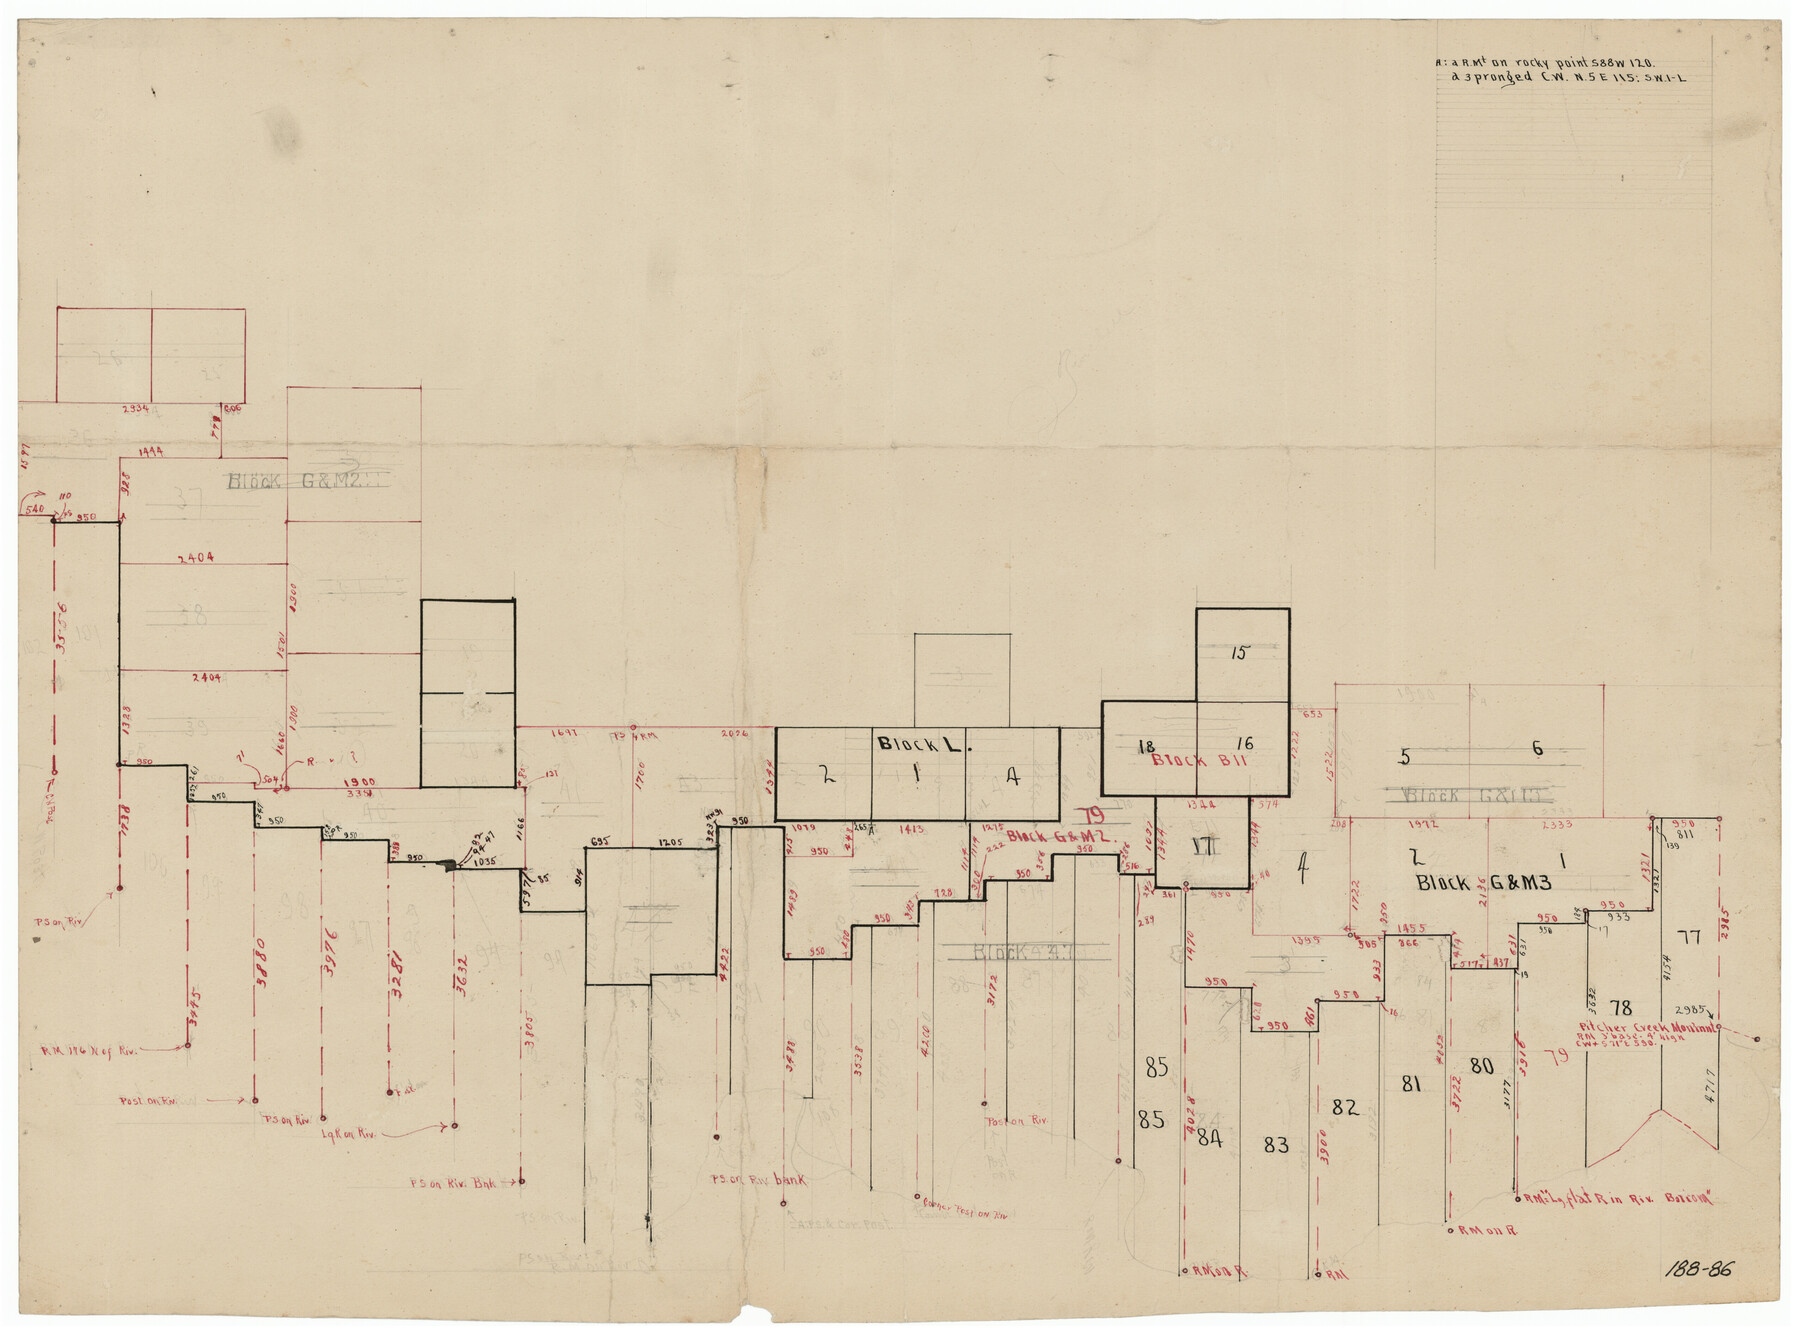 91733, [Sketch showing Blocks B-11, G and M-2 and 3, L, and 47, Sections 77-102], Twichell Survey Records